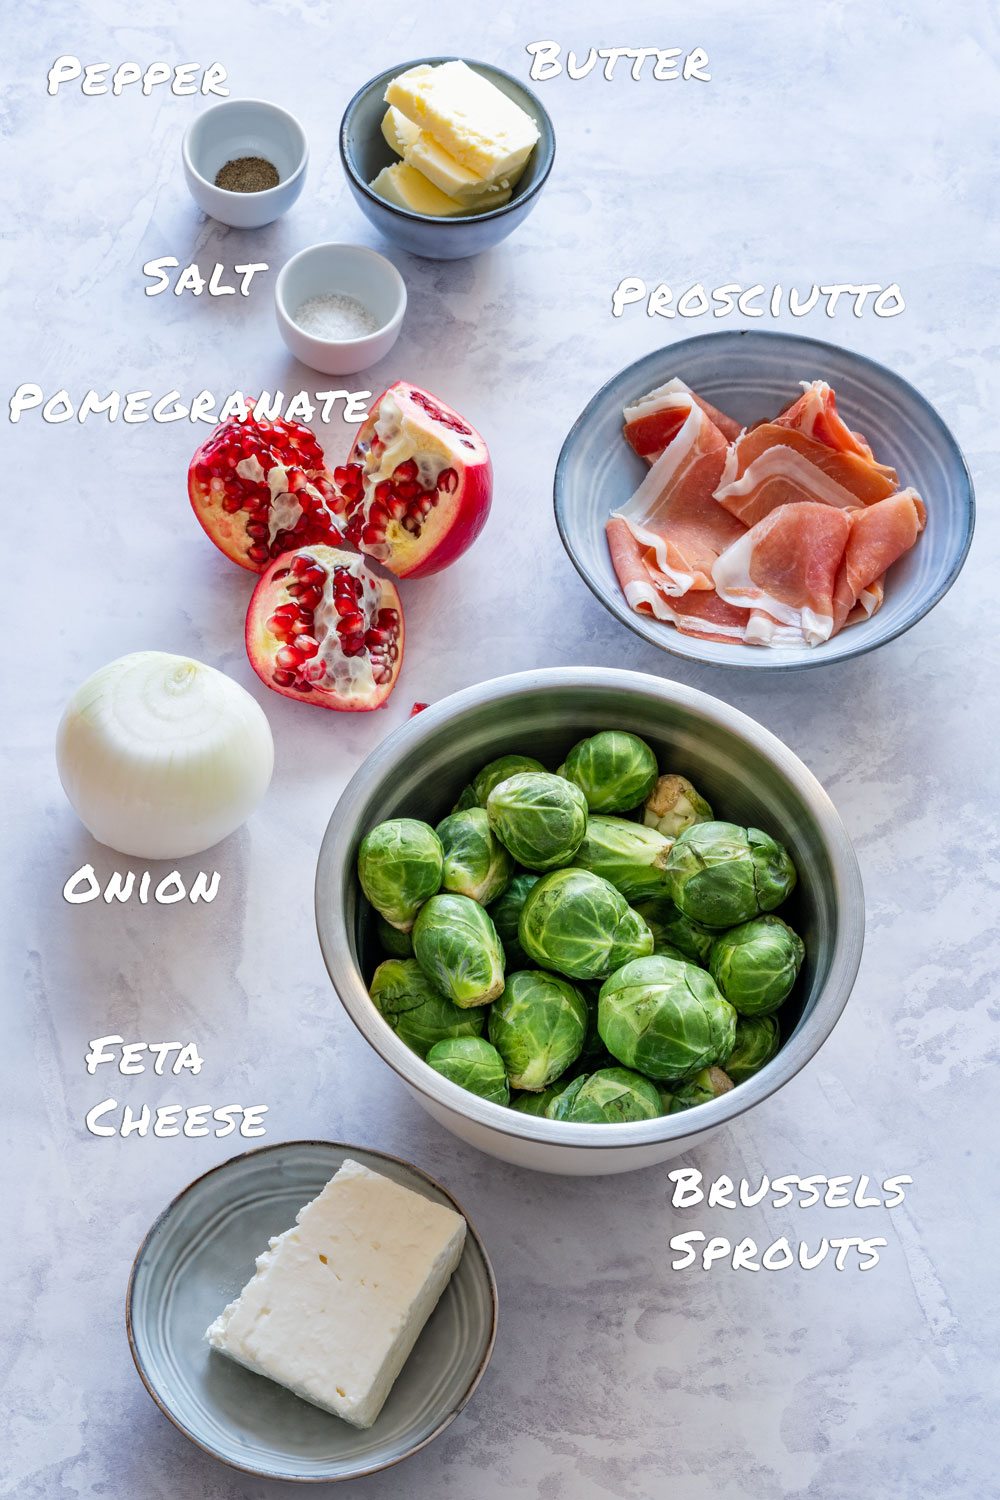 Ingredients of Brussels sprouts salad - Brussels sprouts, prosciutto, feta, onion, pomegranate and butter.